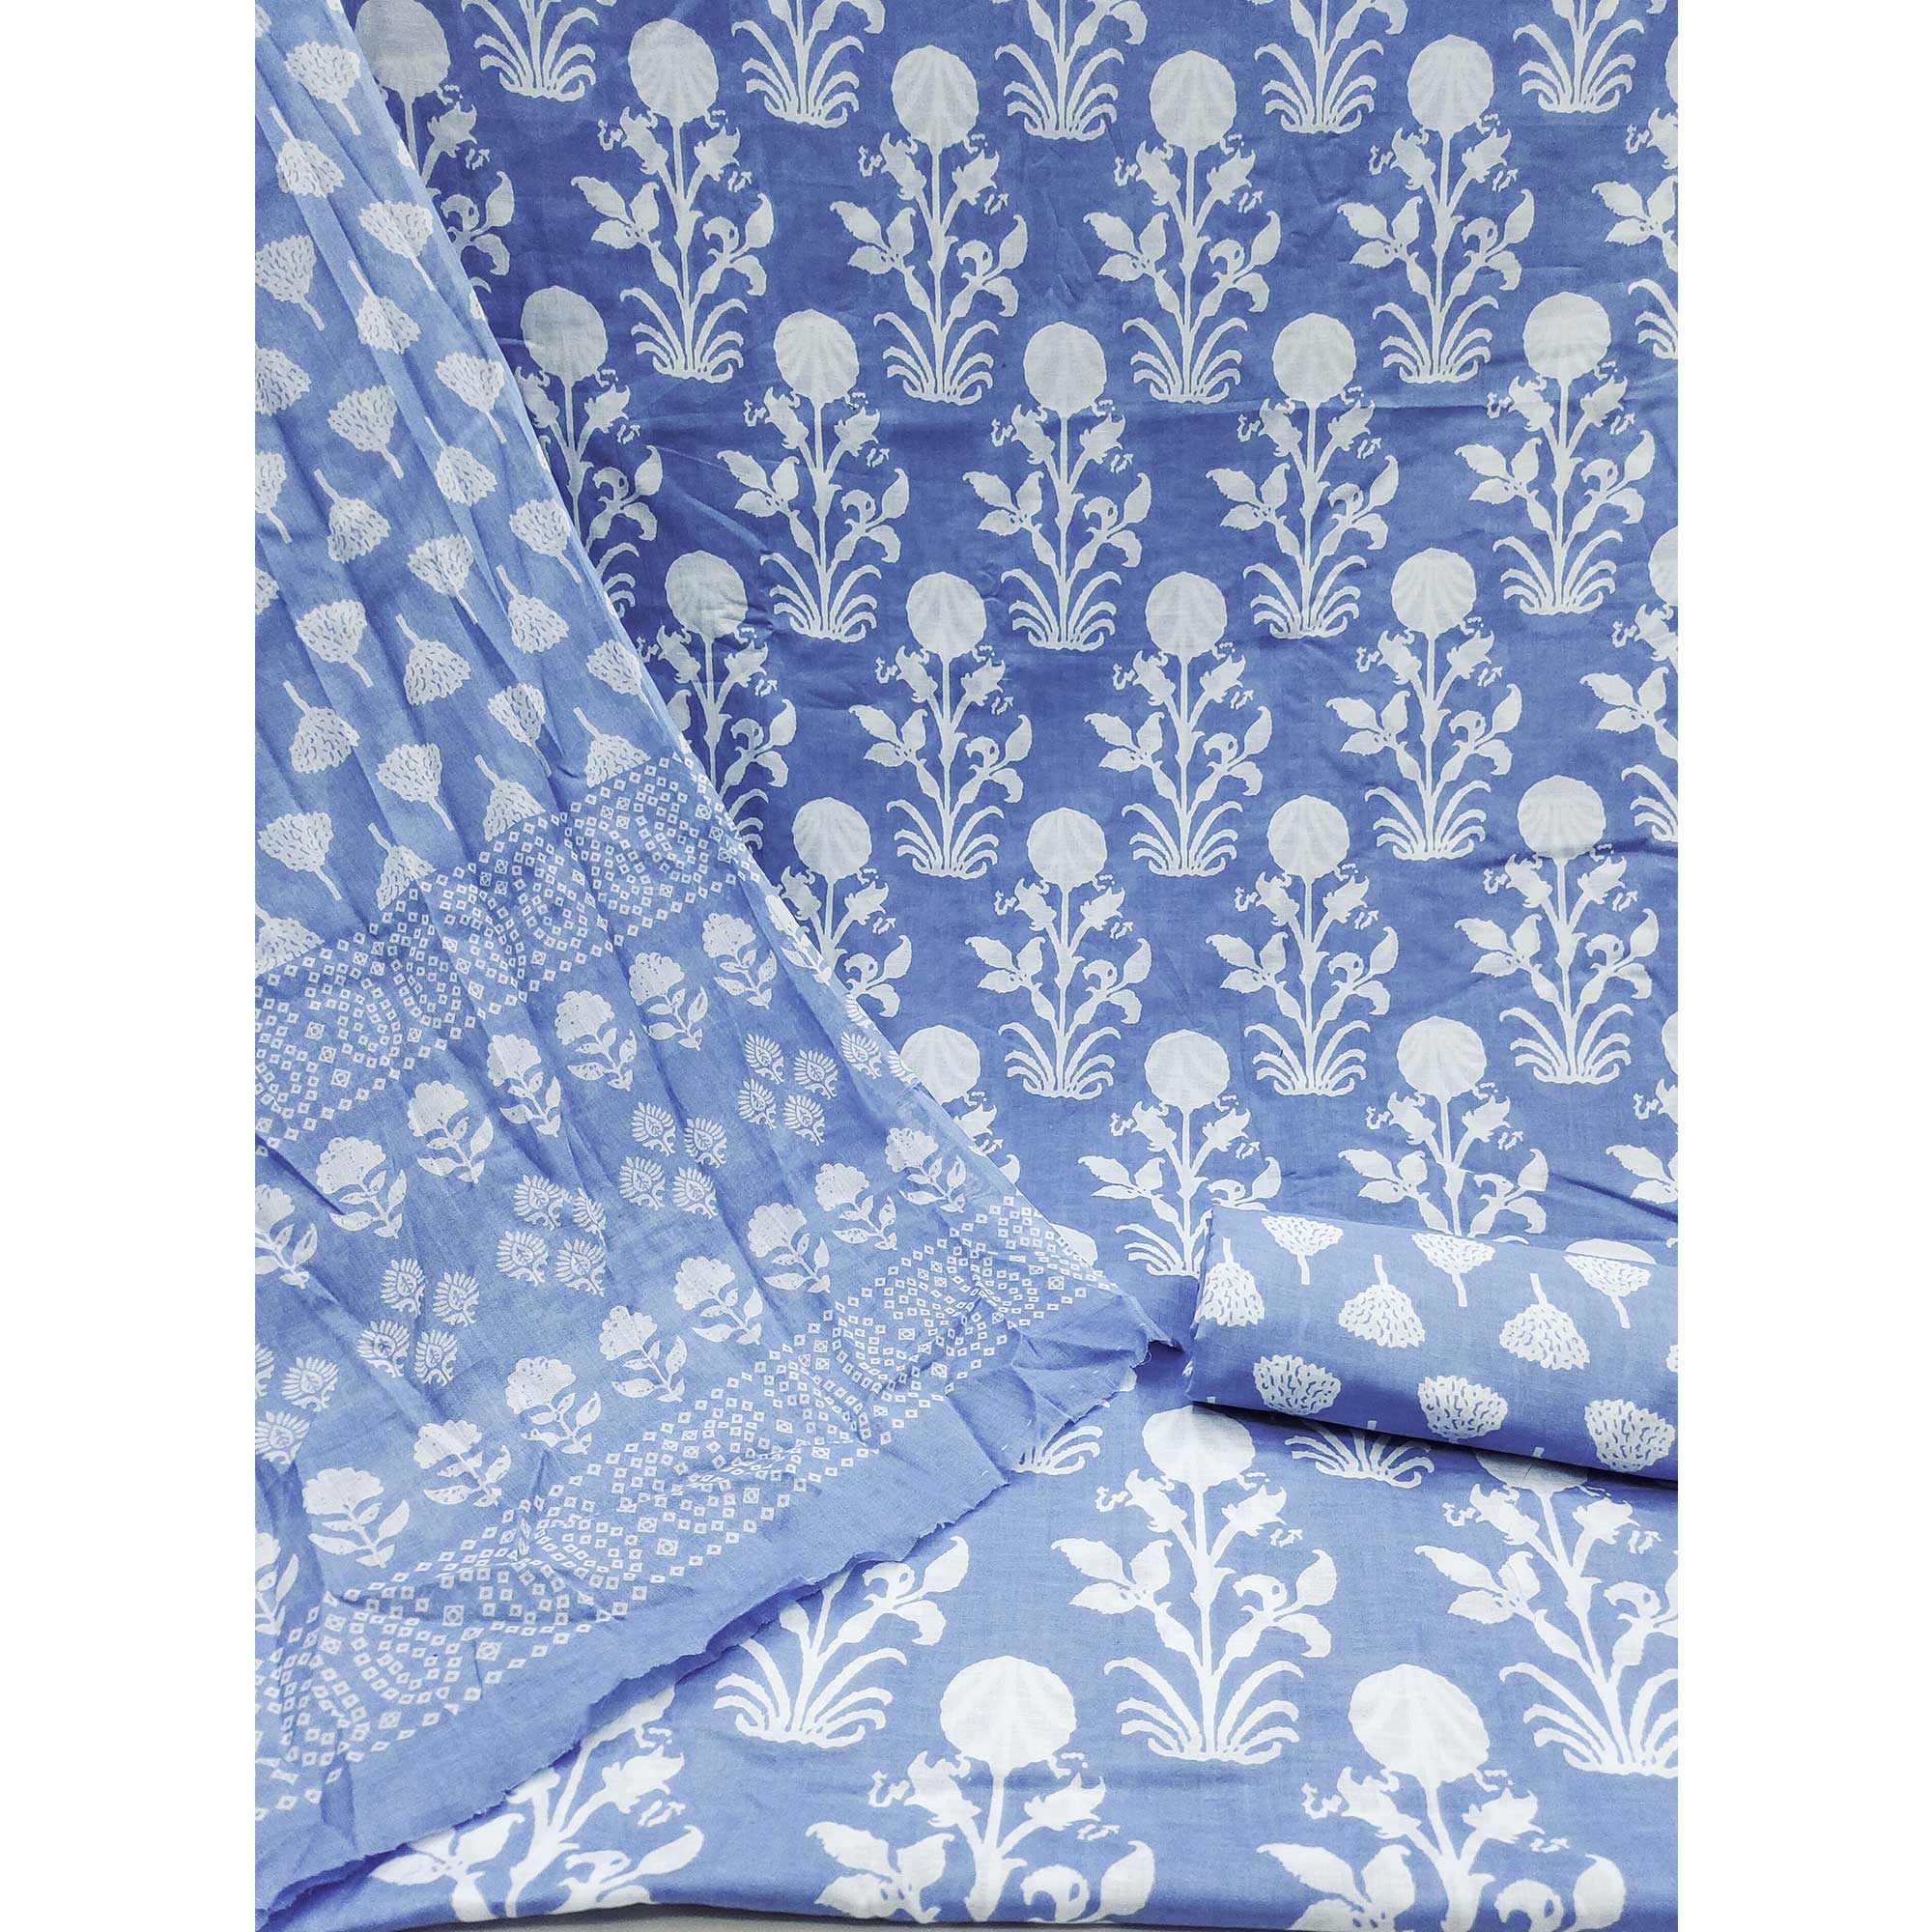 Blue Floral Printed Pure Cotton Dress Material